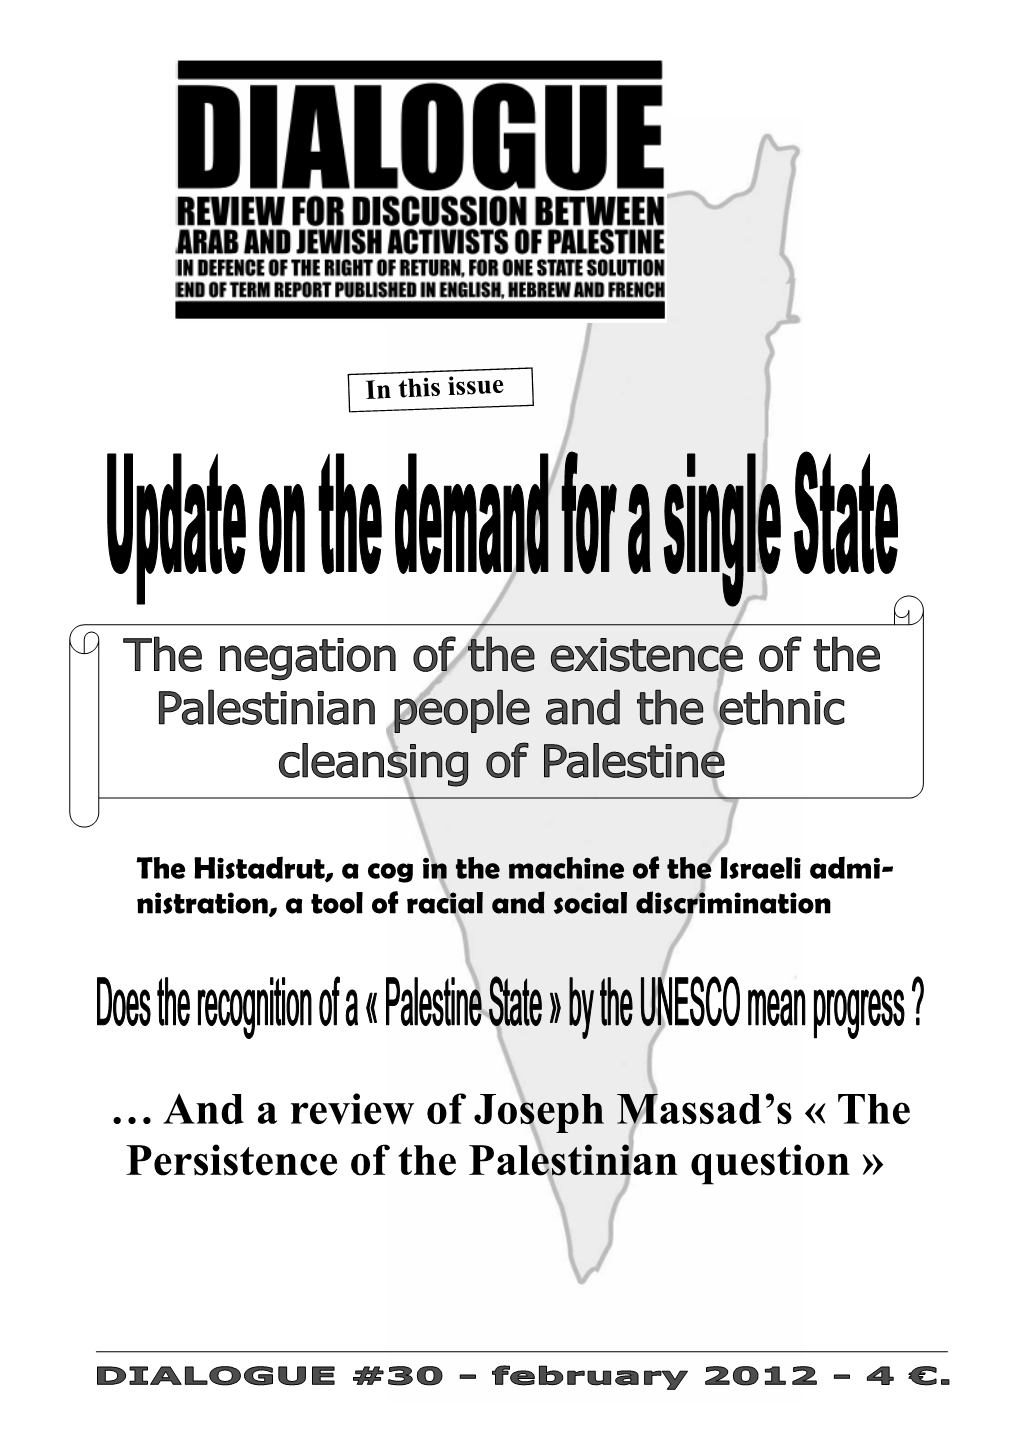 And a Review of Joseph Massad's « the Persistence of the Palestinian Question